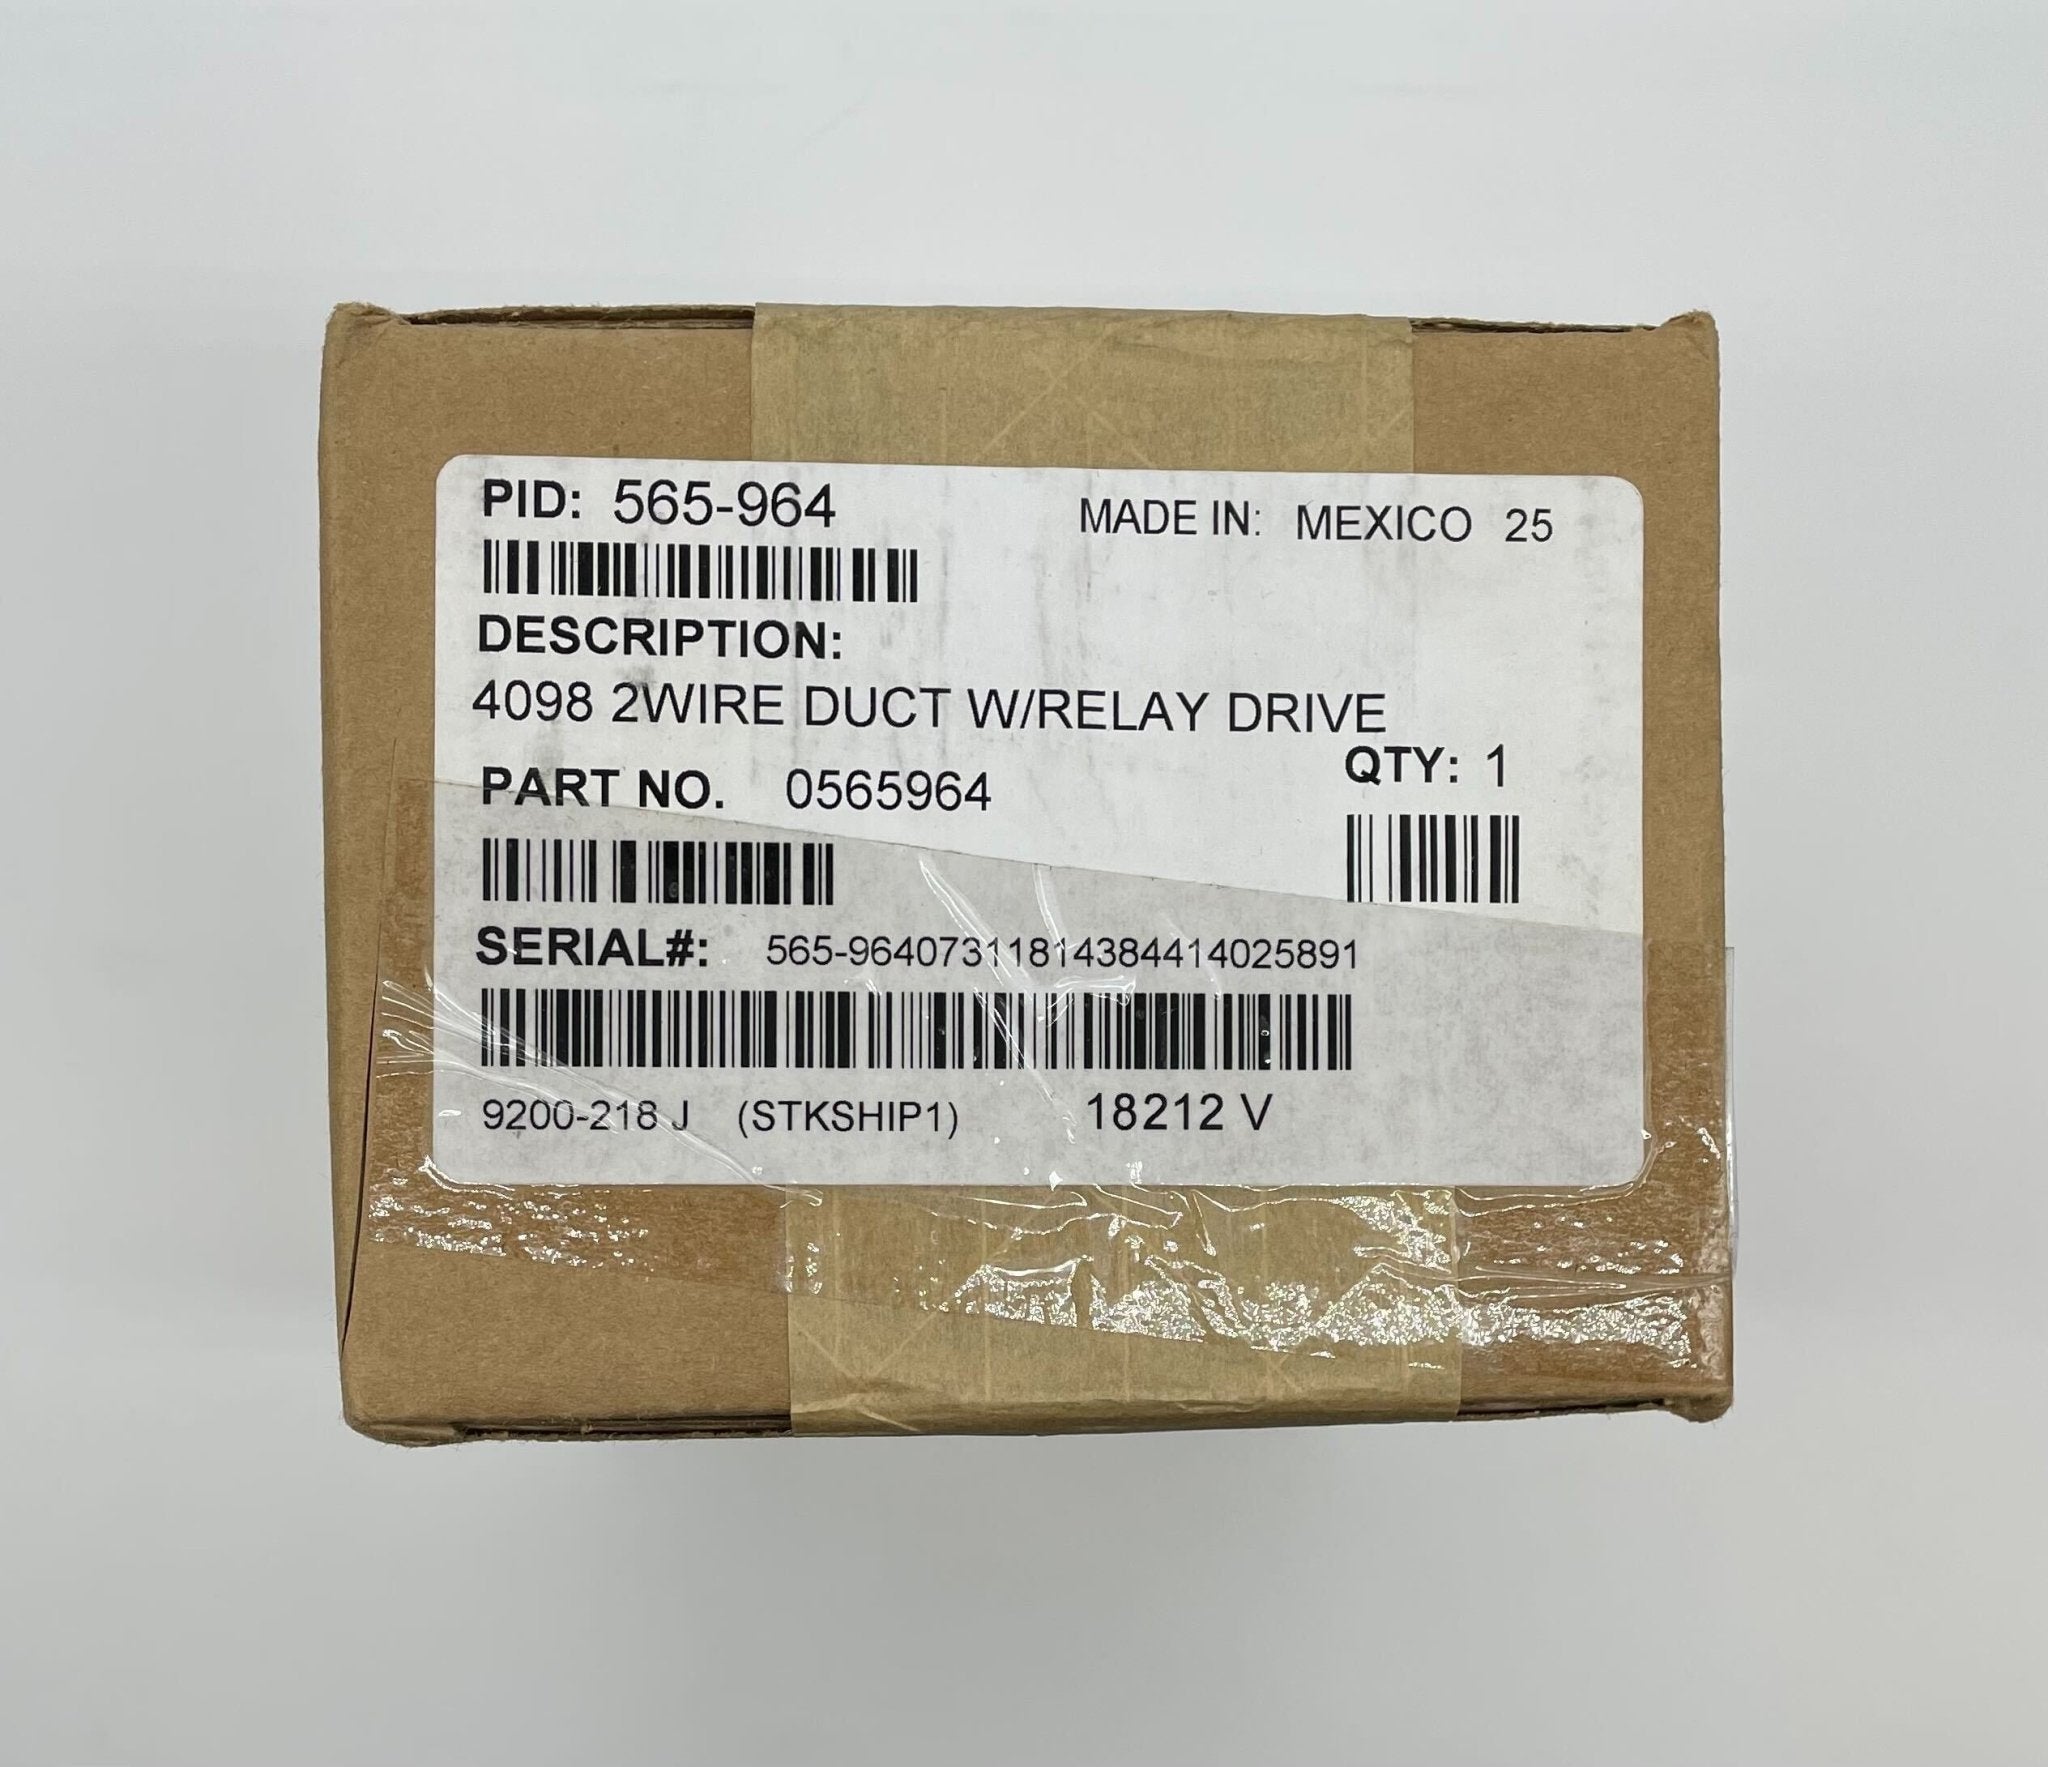 Simplex 565-964 2-Wire Duct Relay DrIVe - The Fire Alarm Supplier